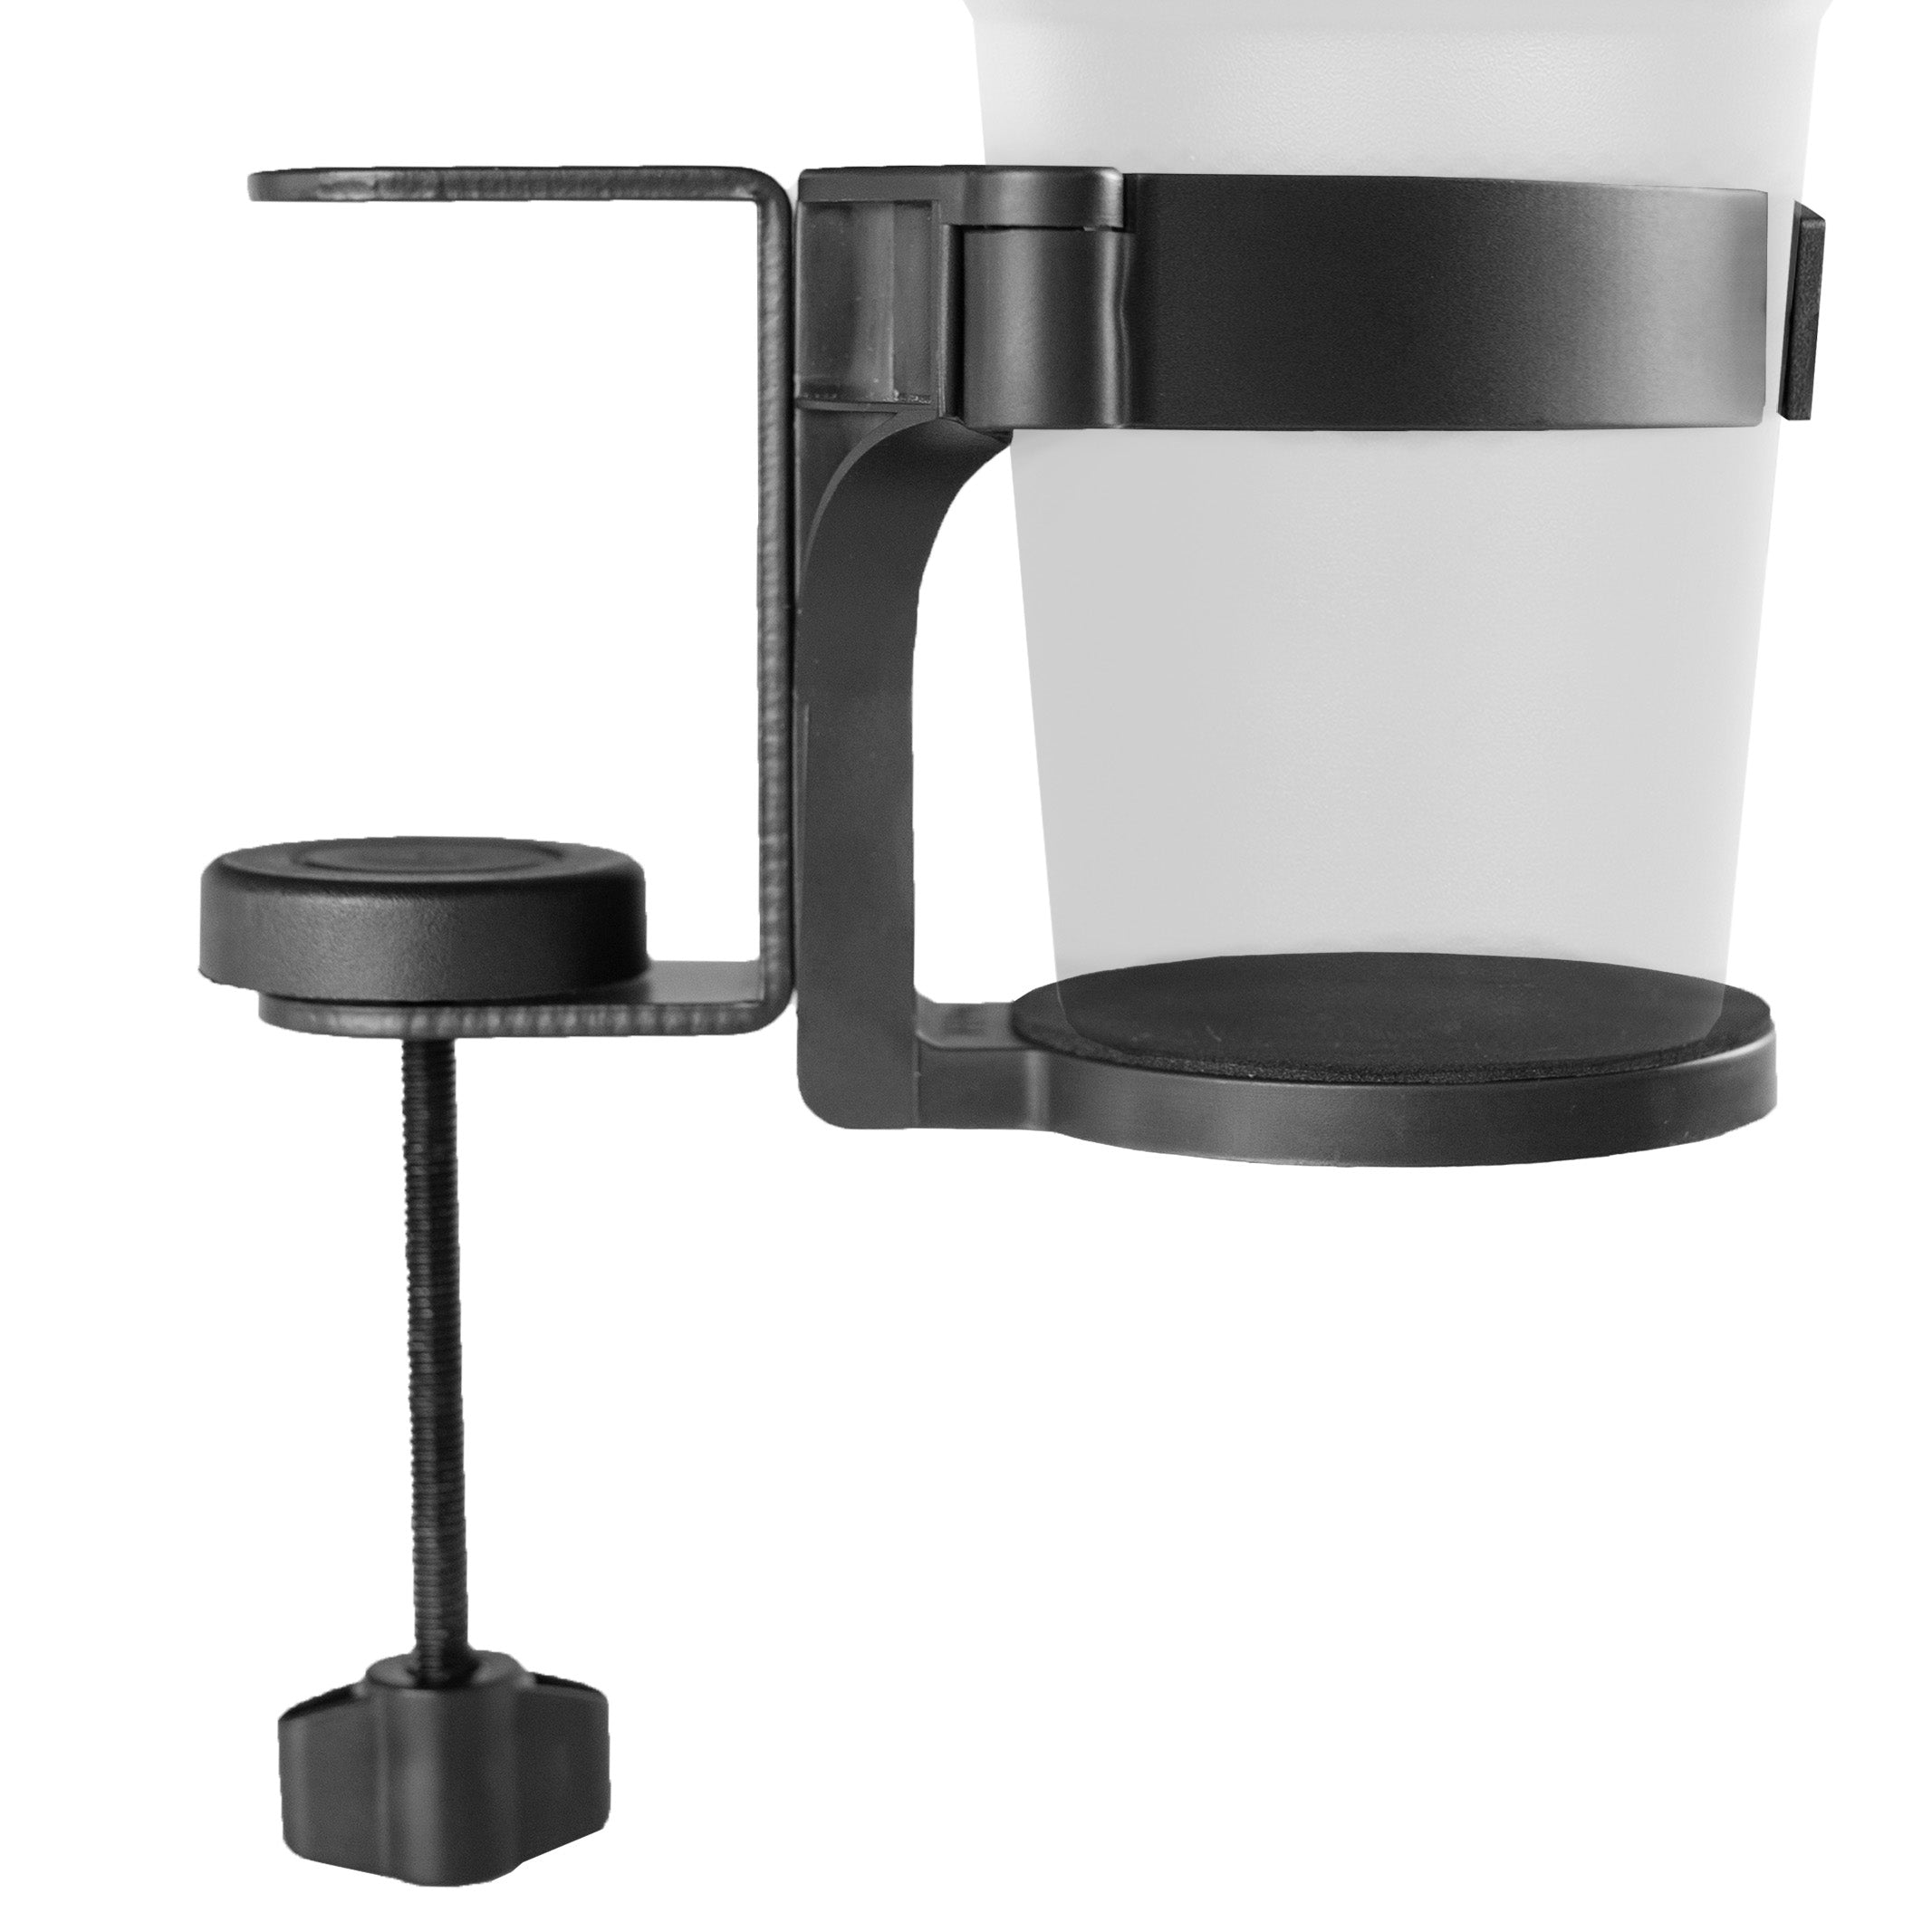 Clamp-on Desk Cup Holder – VIVO - desk solutions, screen mounting